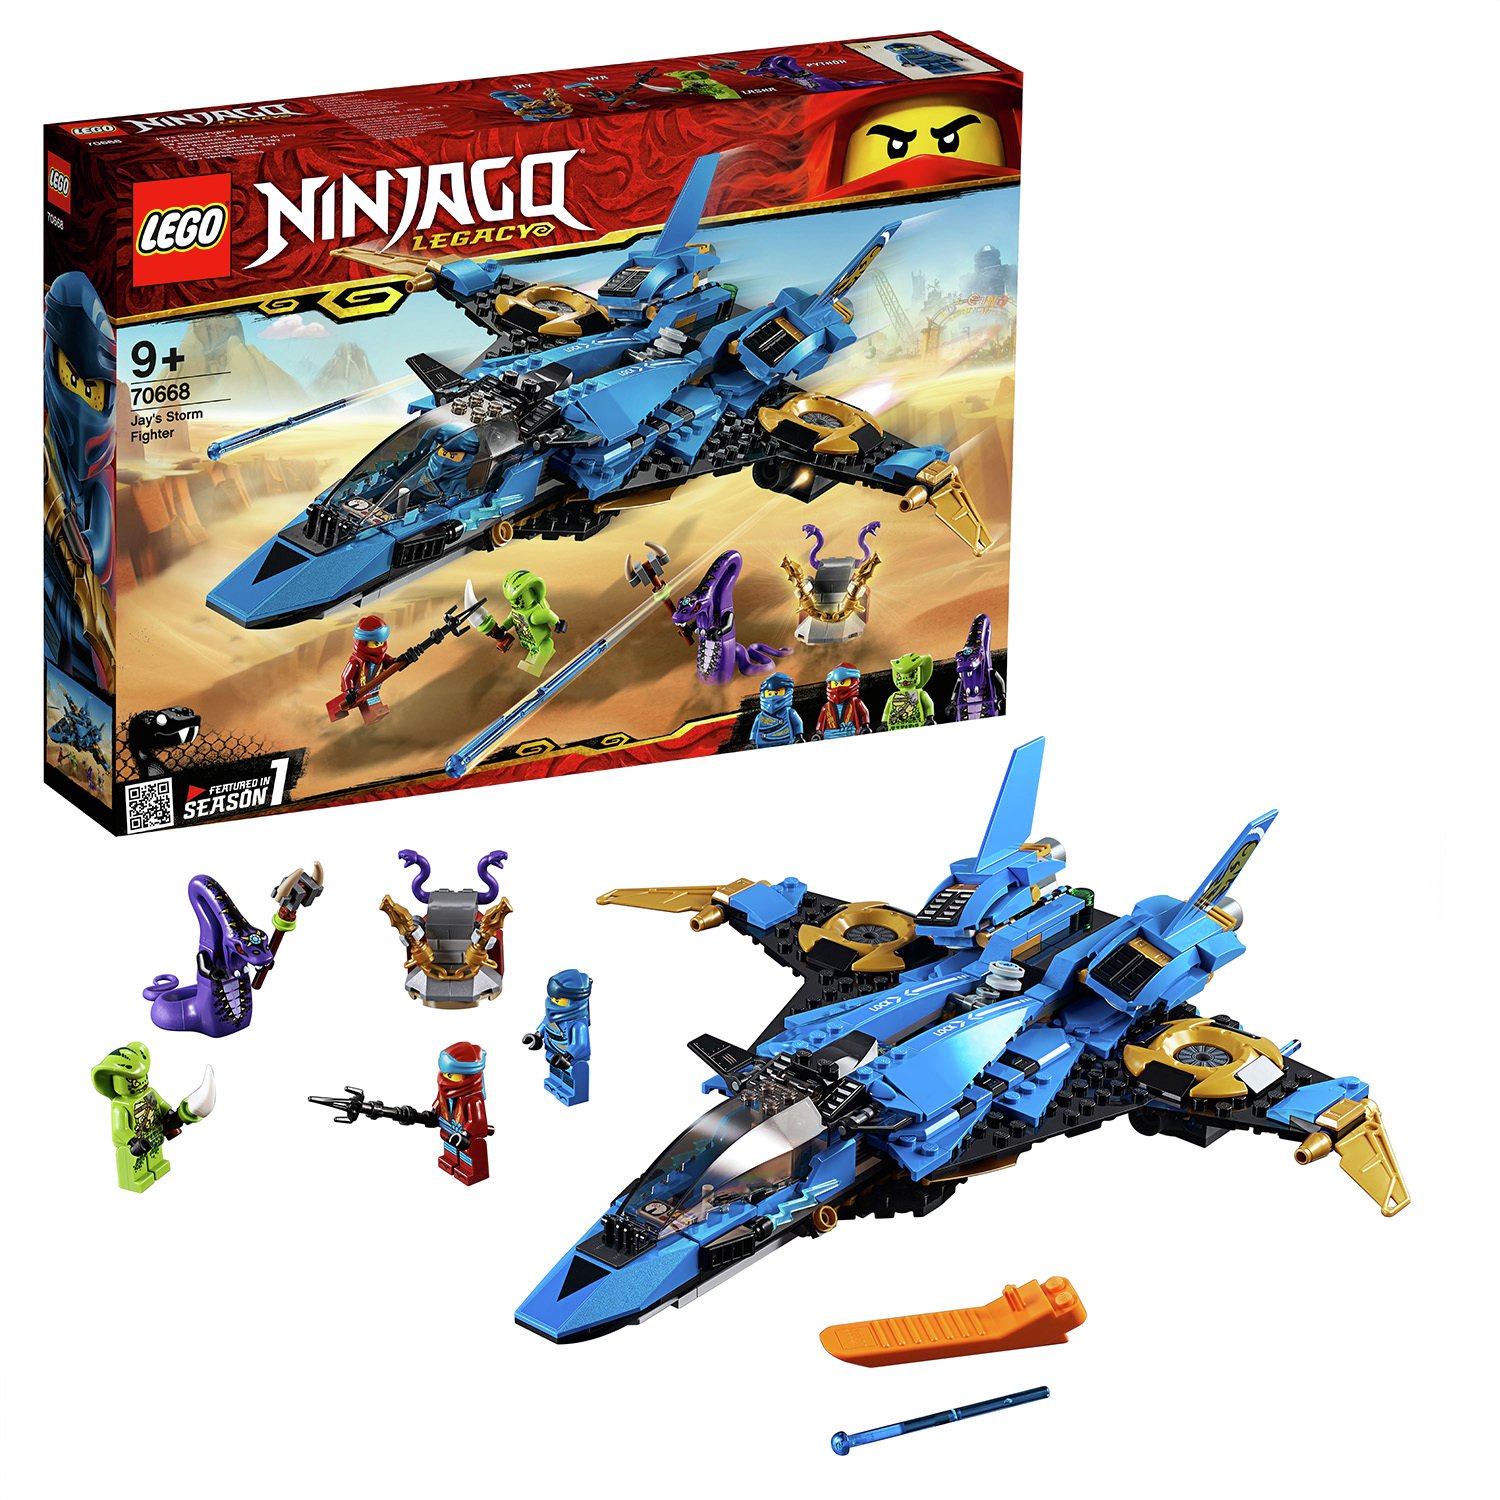 LEGO Ninjago Jay's Storm Fighter Toy Jet Plane Review